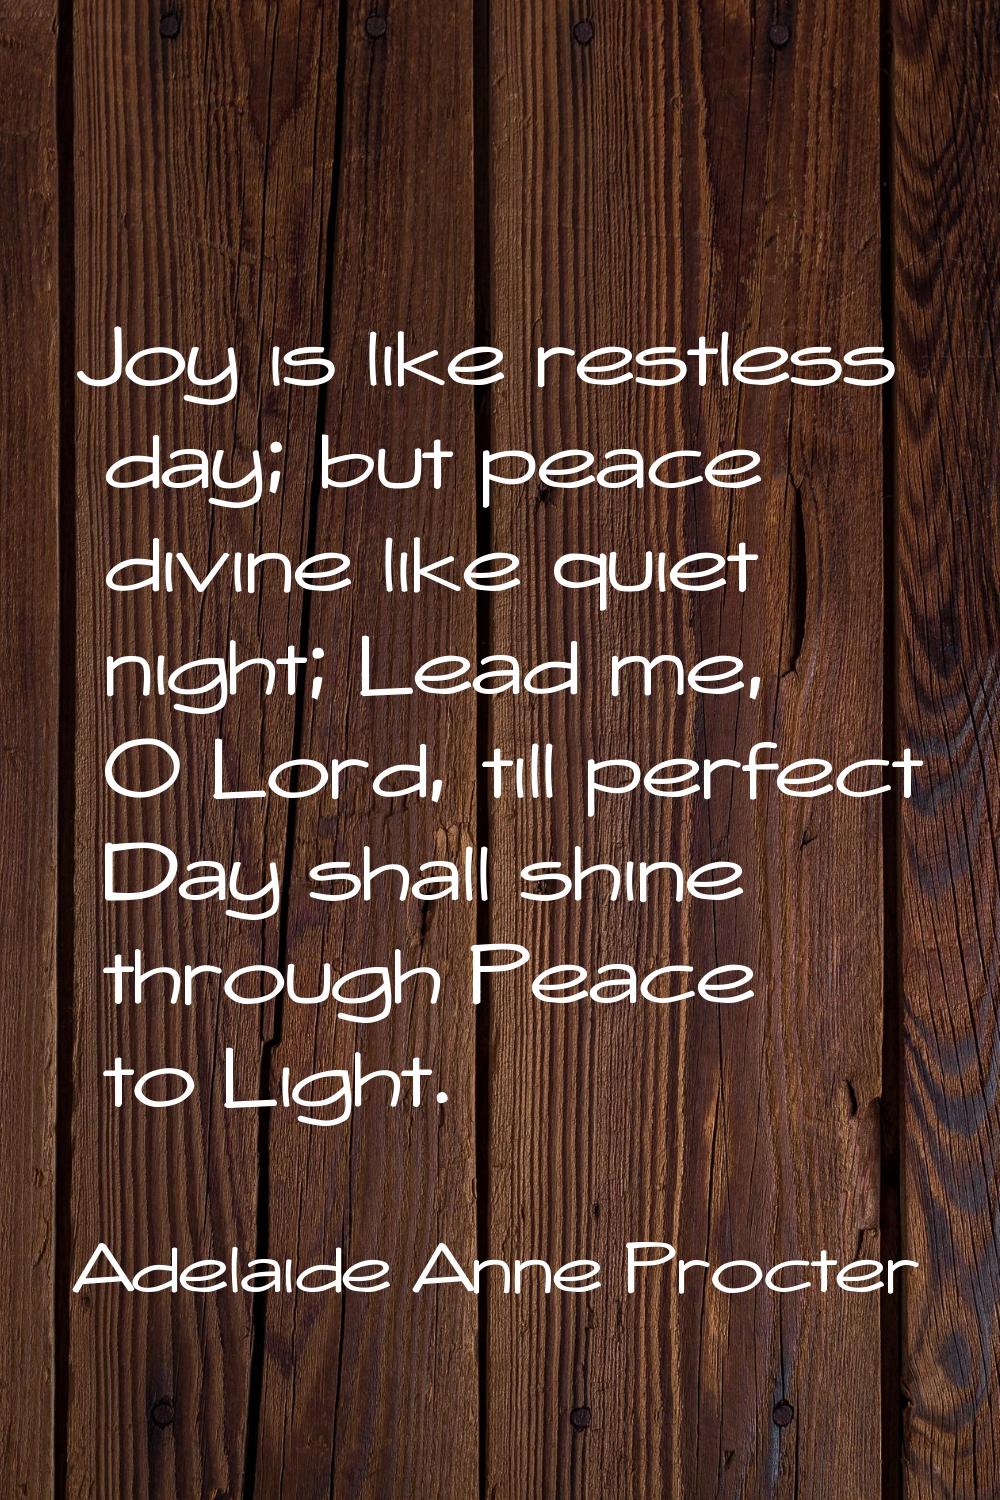 Joy is like restless day; but peace divine like quiet night; Lead me, O Lord, till perfect Day shal